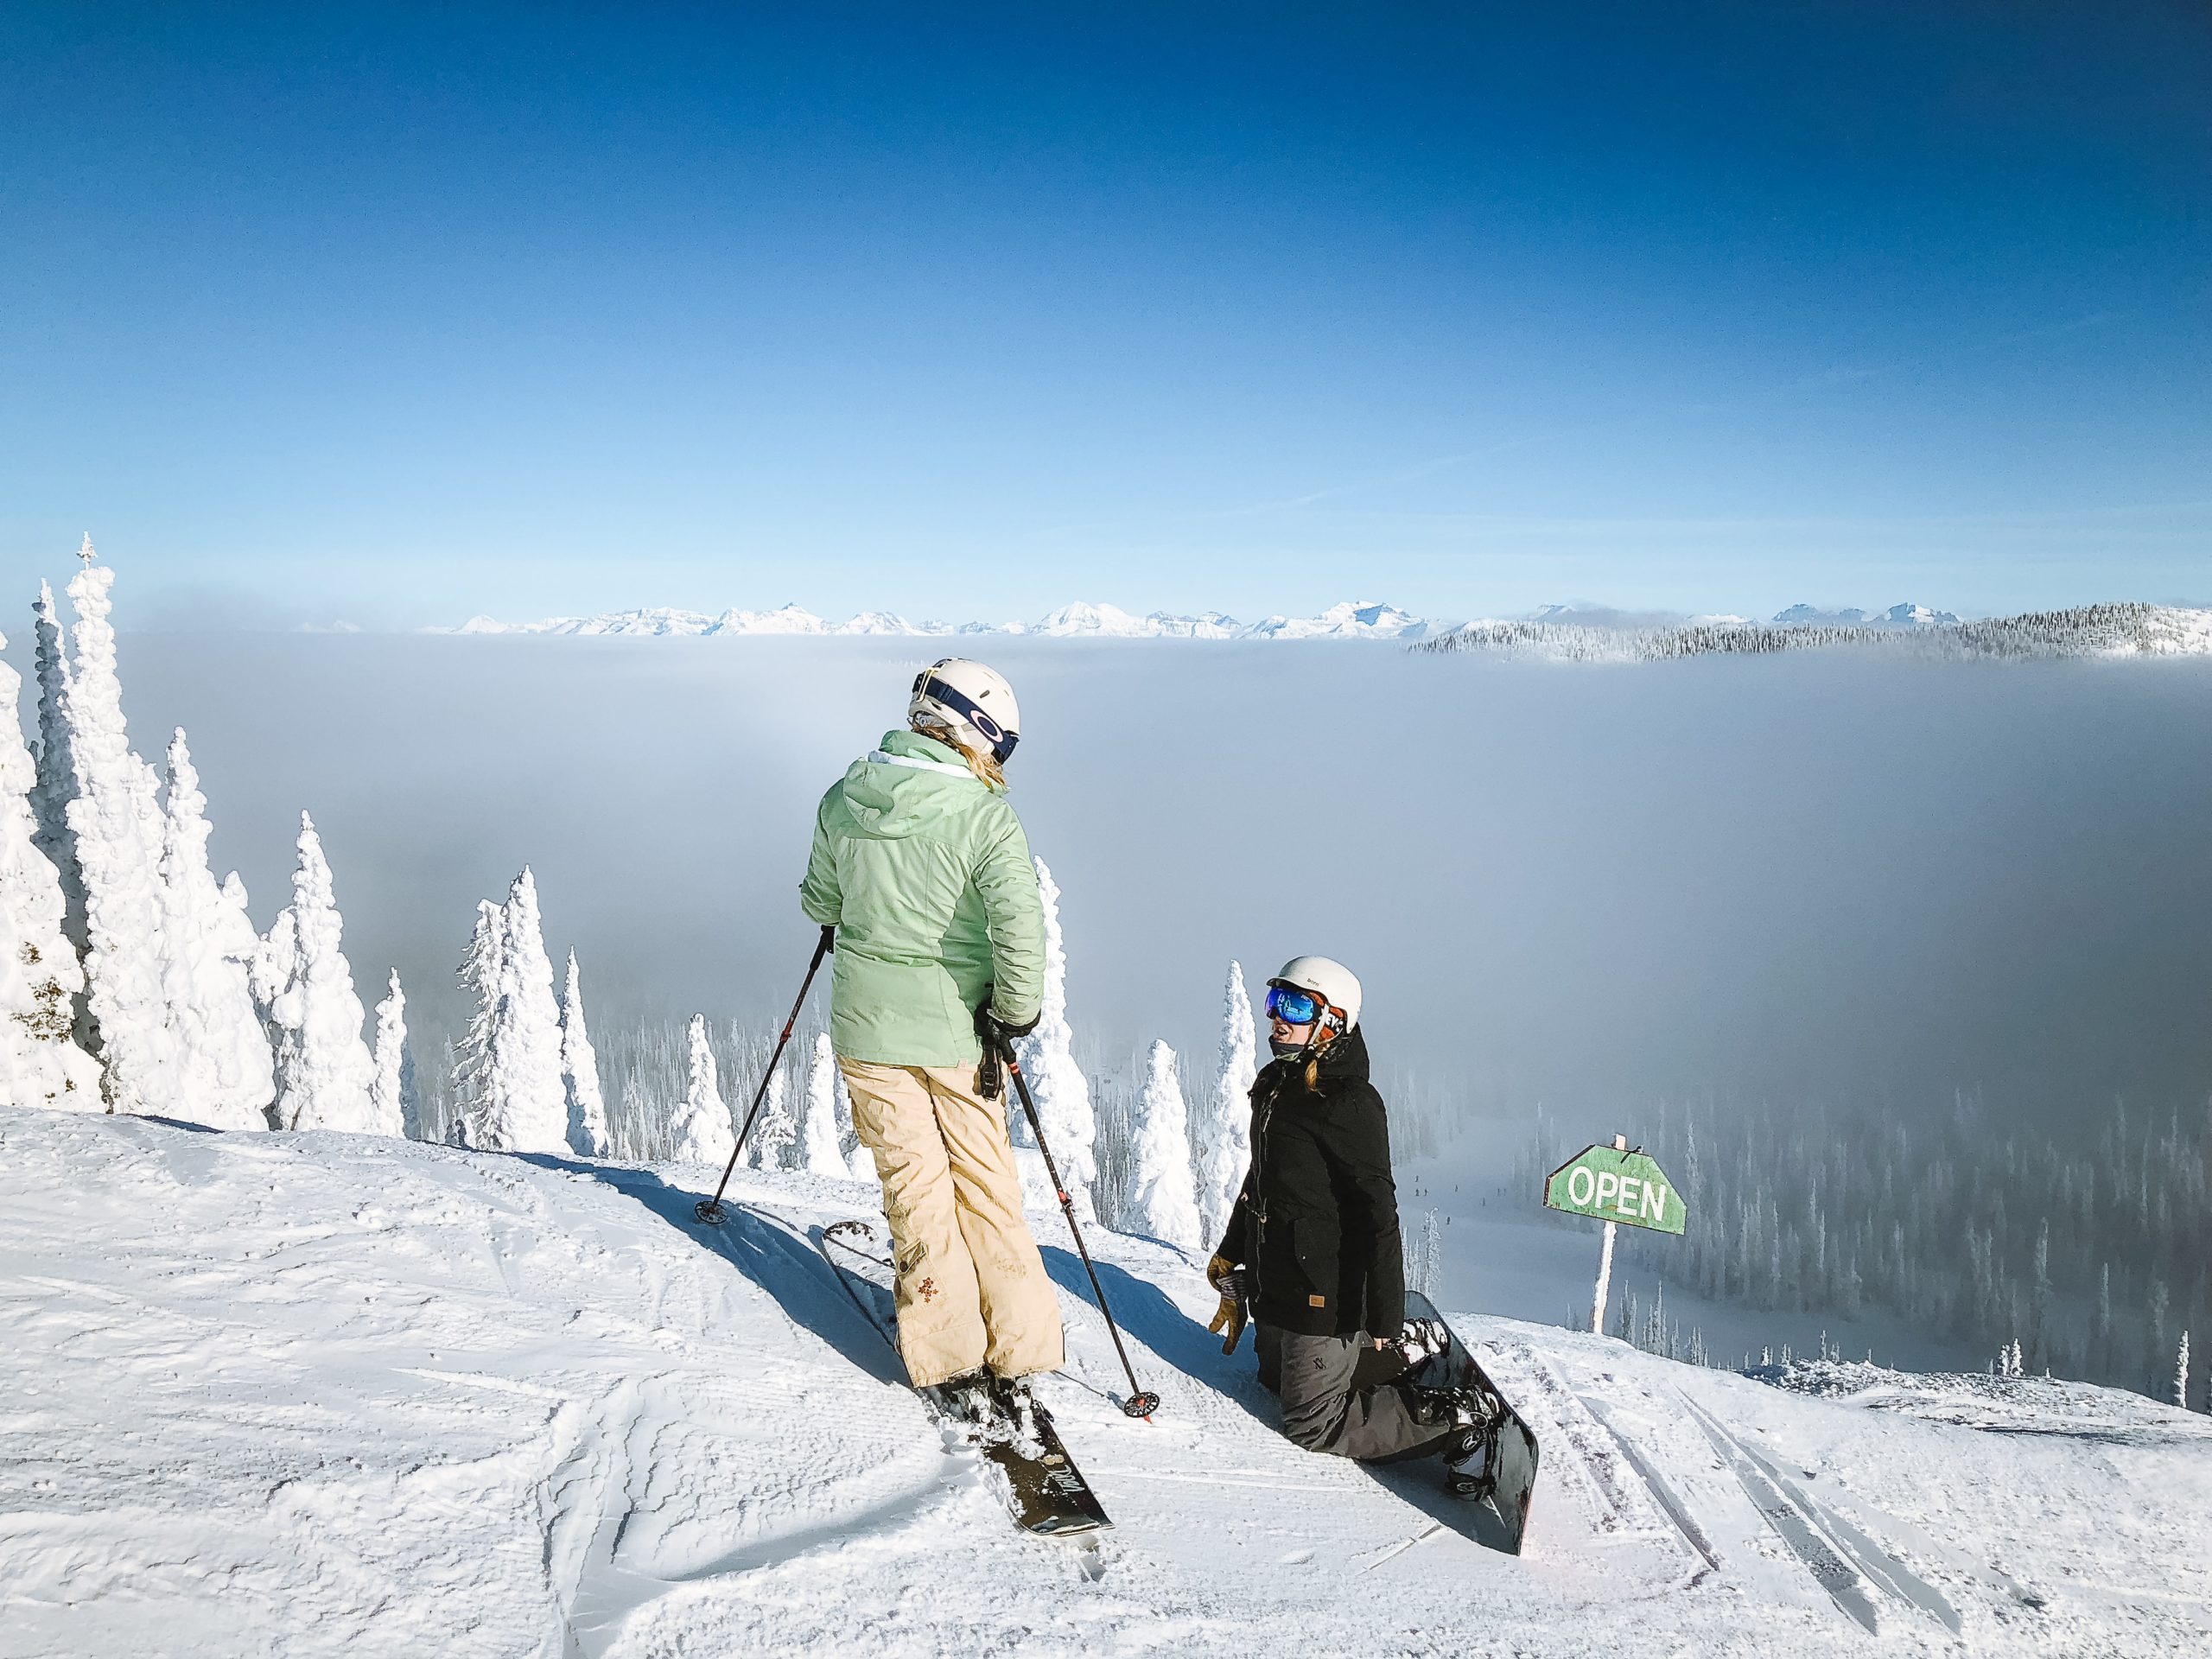 Split your stay at Big Sky Resort and Whitefish Mountain Resort!